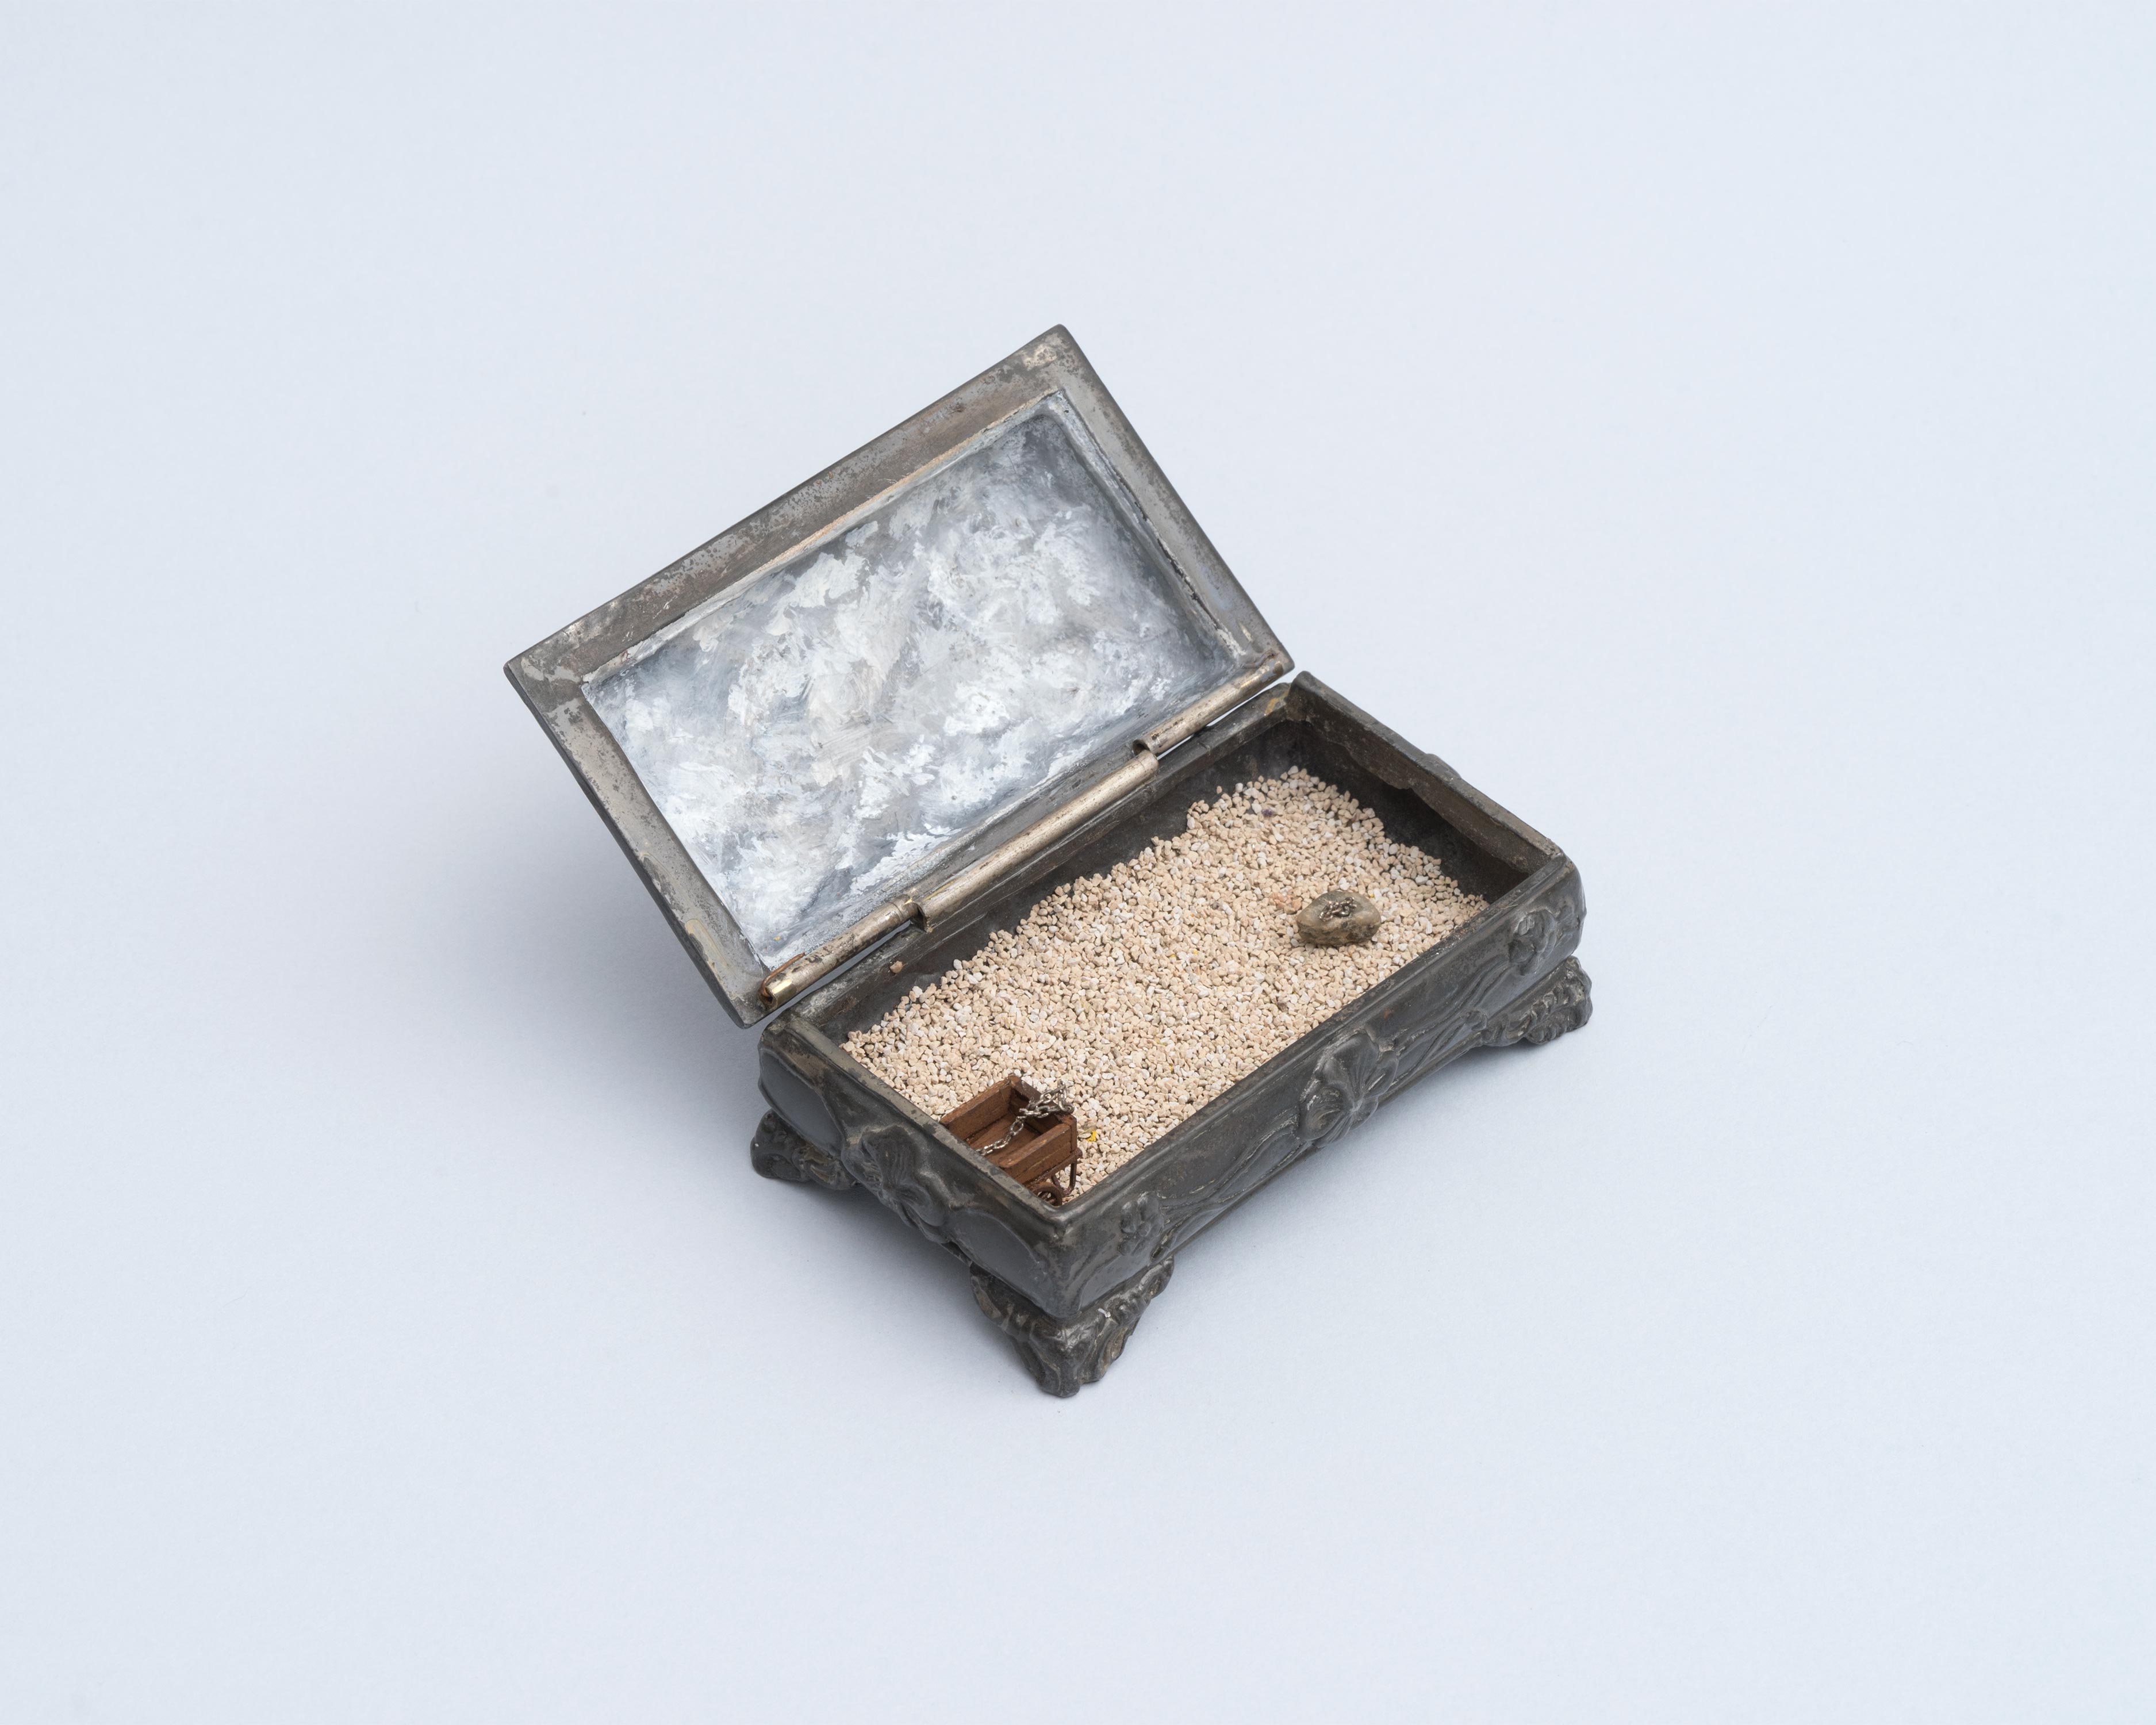 Curtis Talwst Santiago<br>Empty Wagon Leaving Slave Market<br>2016<br>Mixed media diorama in reclaimed jewelry box<br>3.625 x 2.125 x 2.125 in (9.2 x 5.4 x 5.4 cm)